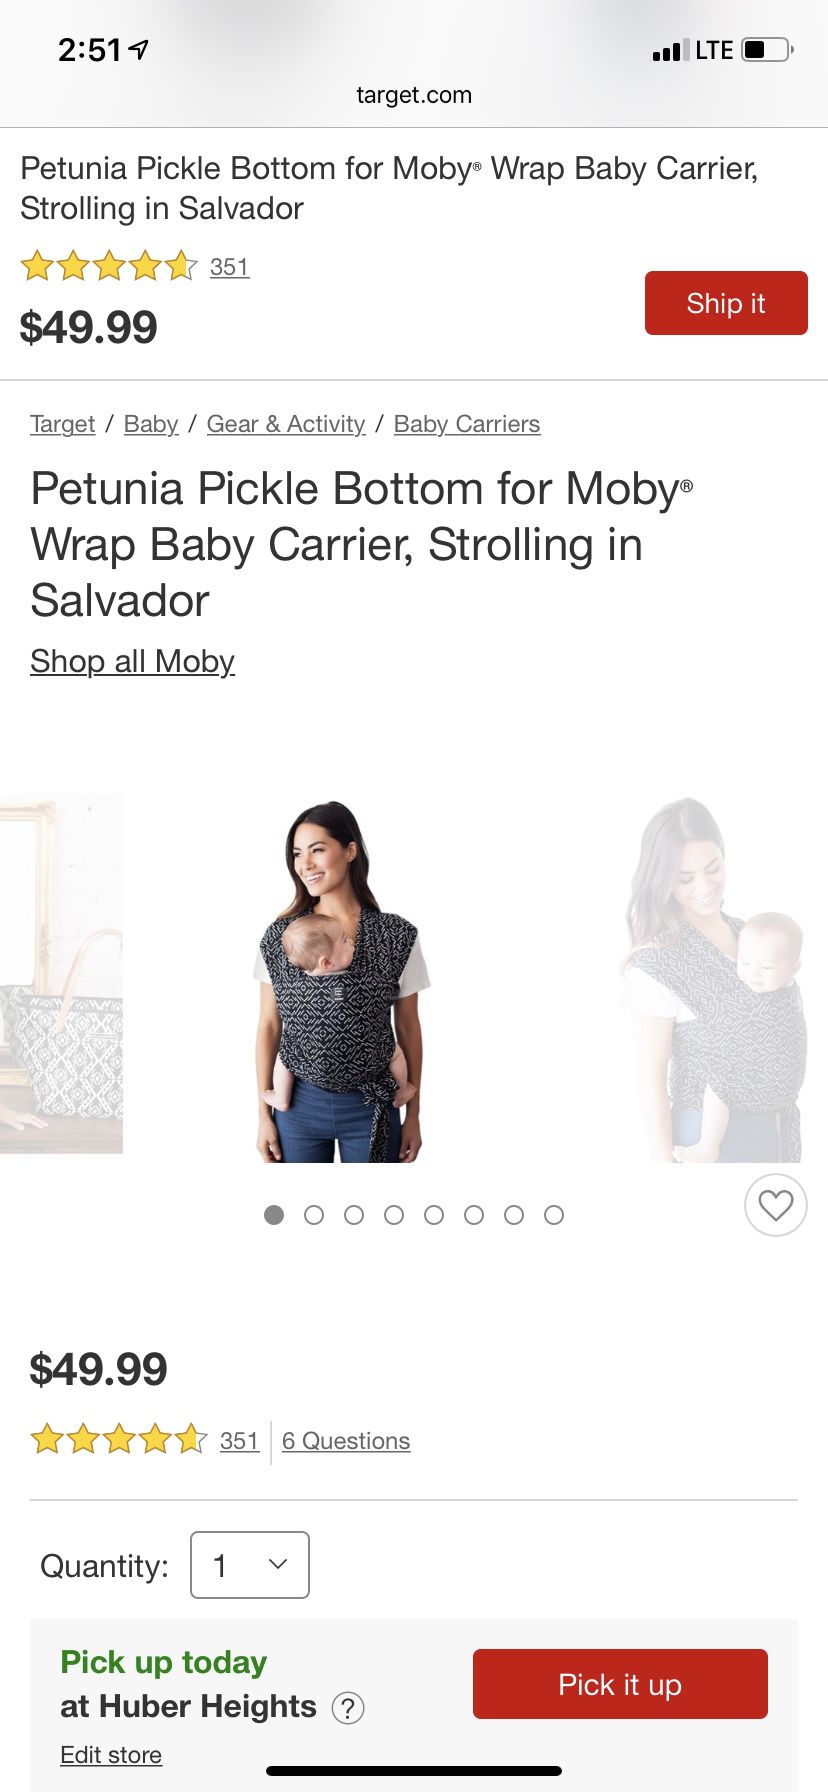 PPB wrap baby carrier